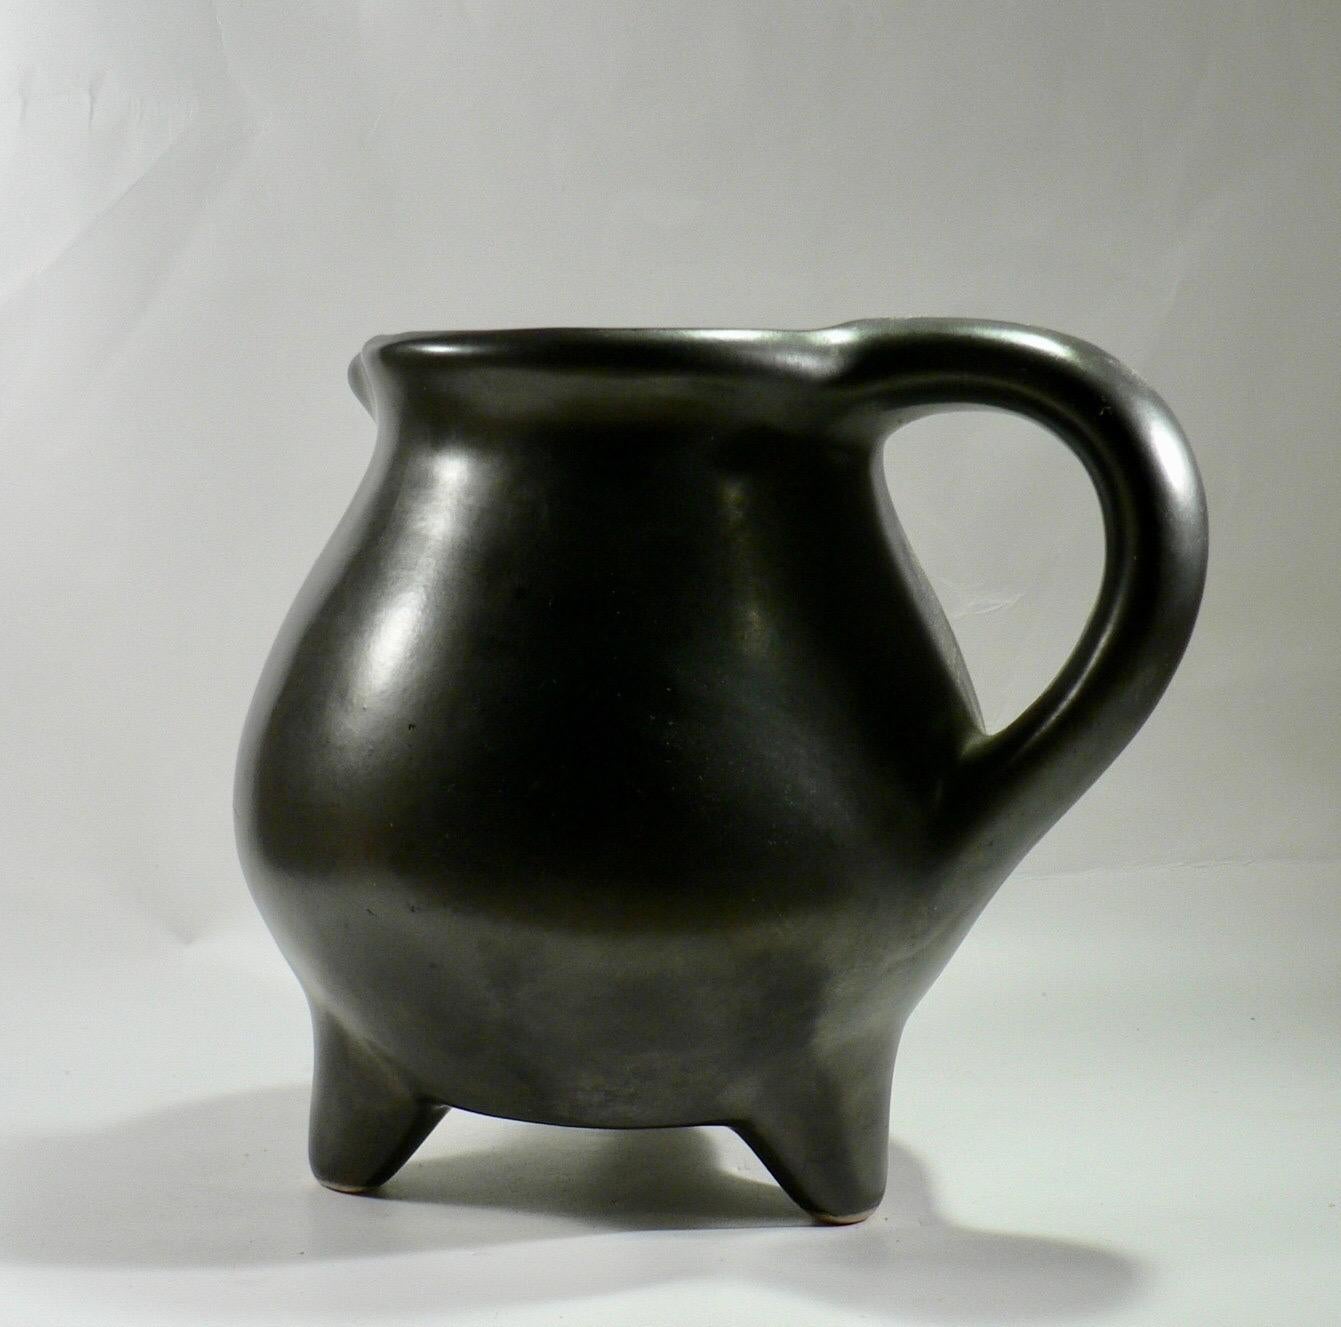 A bulging pitcher with a tripod base from Périgord pottery, featuring the form and glaze characteristic of French ceramics from the 1950s. In perfect condition.






